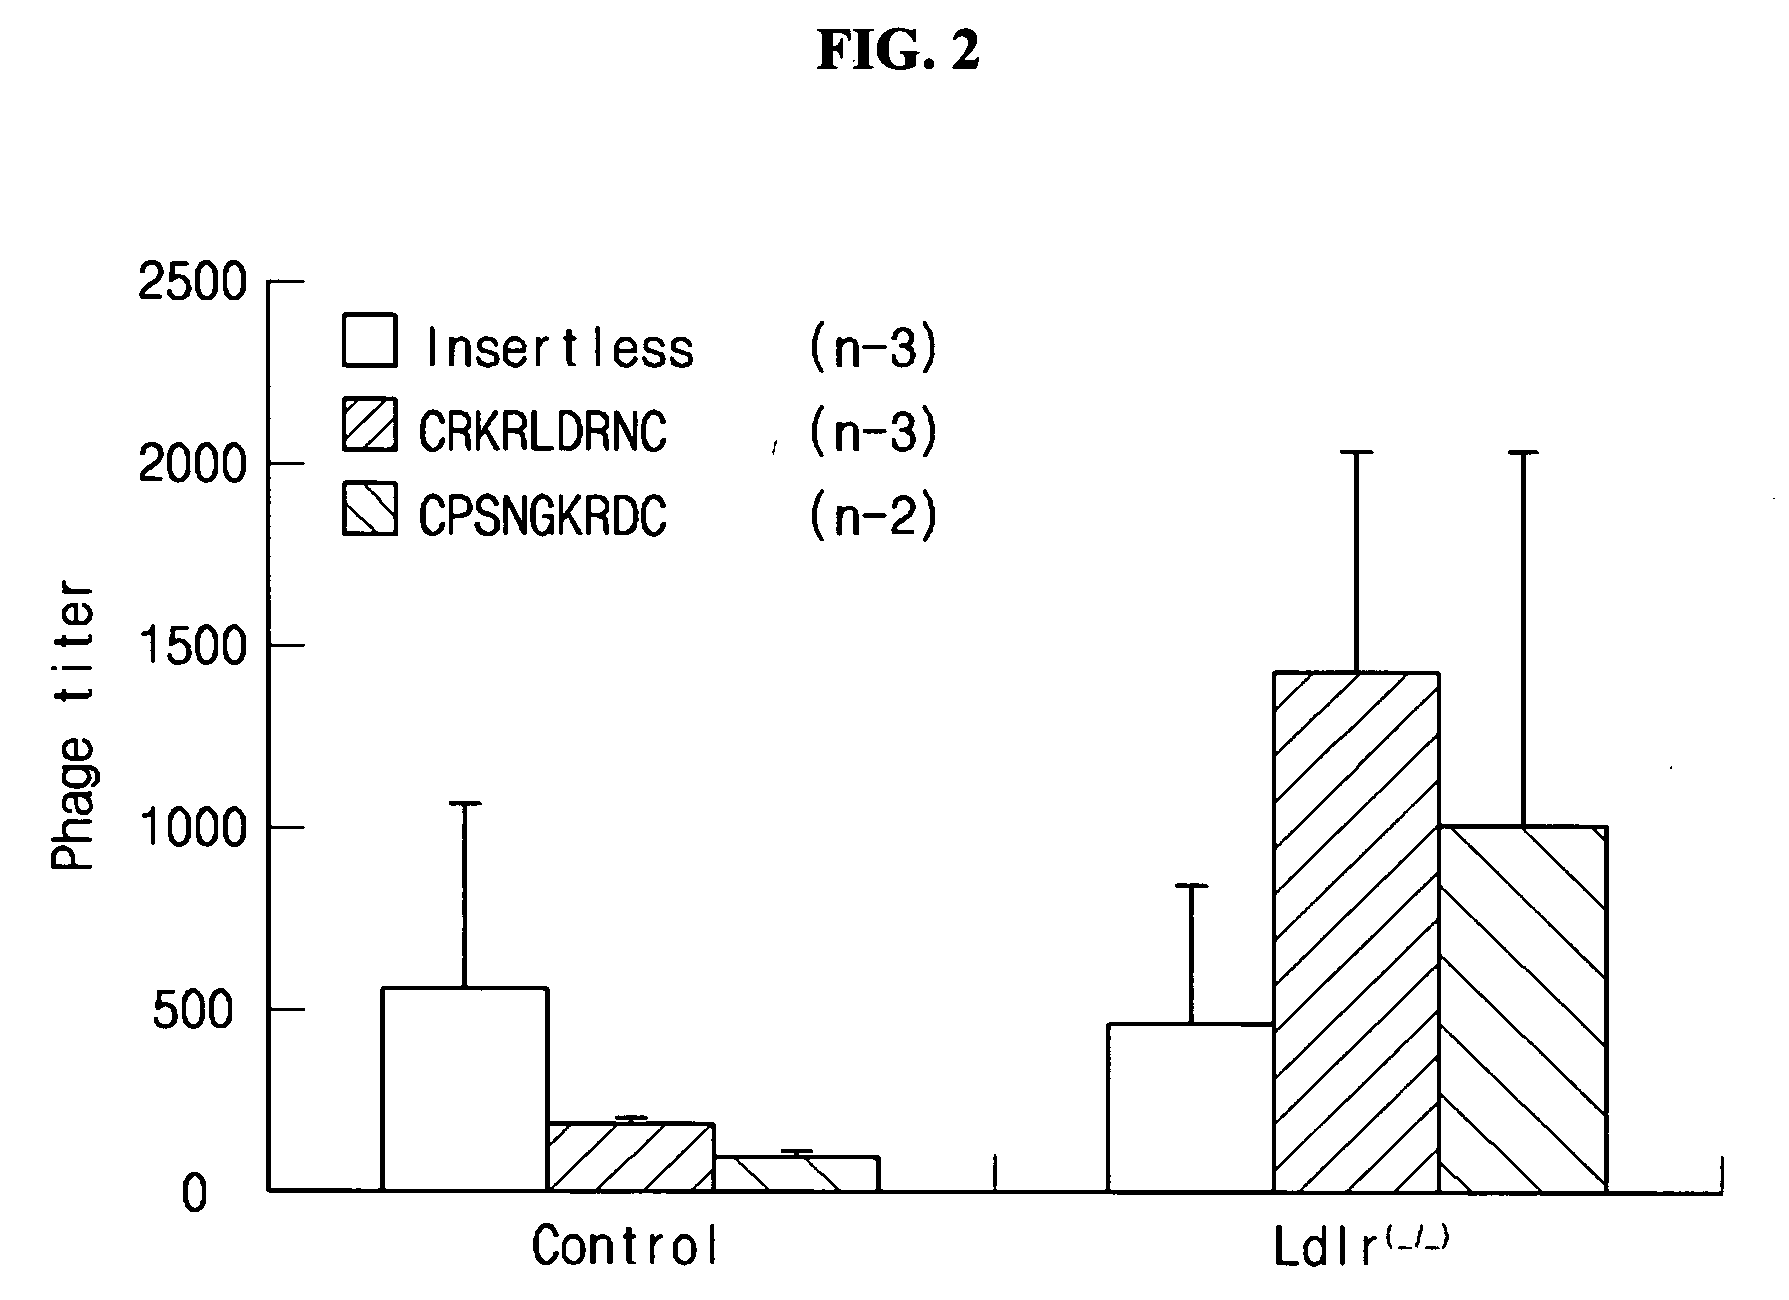 Peptide for diagnosing, preventing and treating atherosclerosis and uses thereof